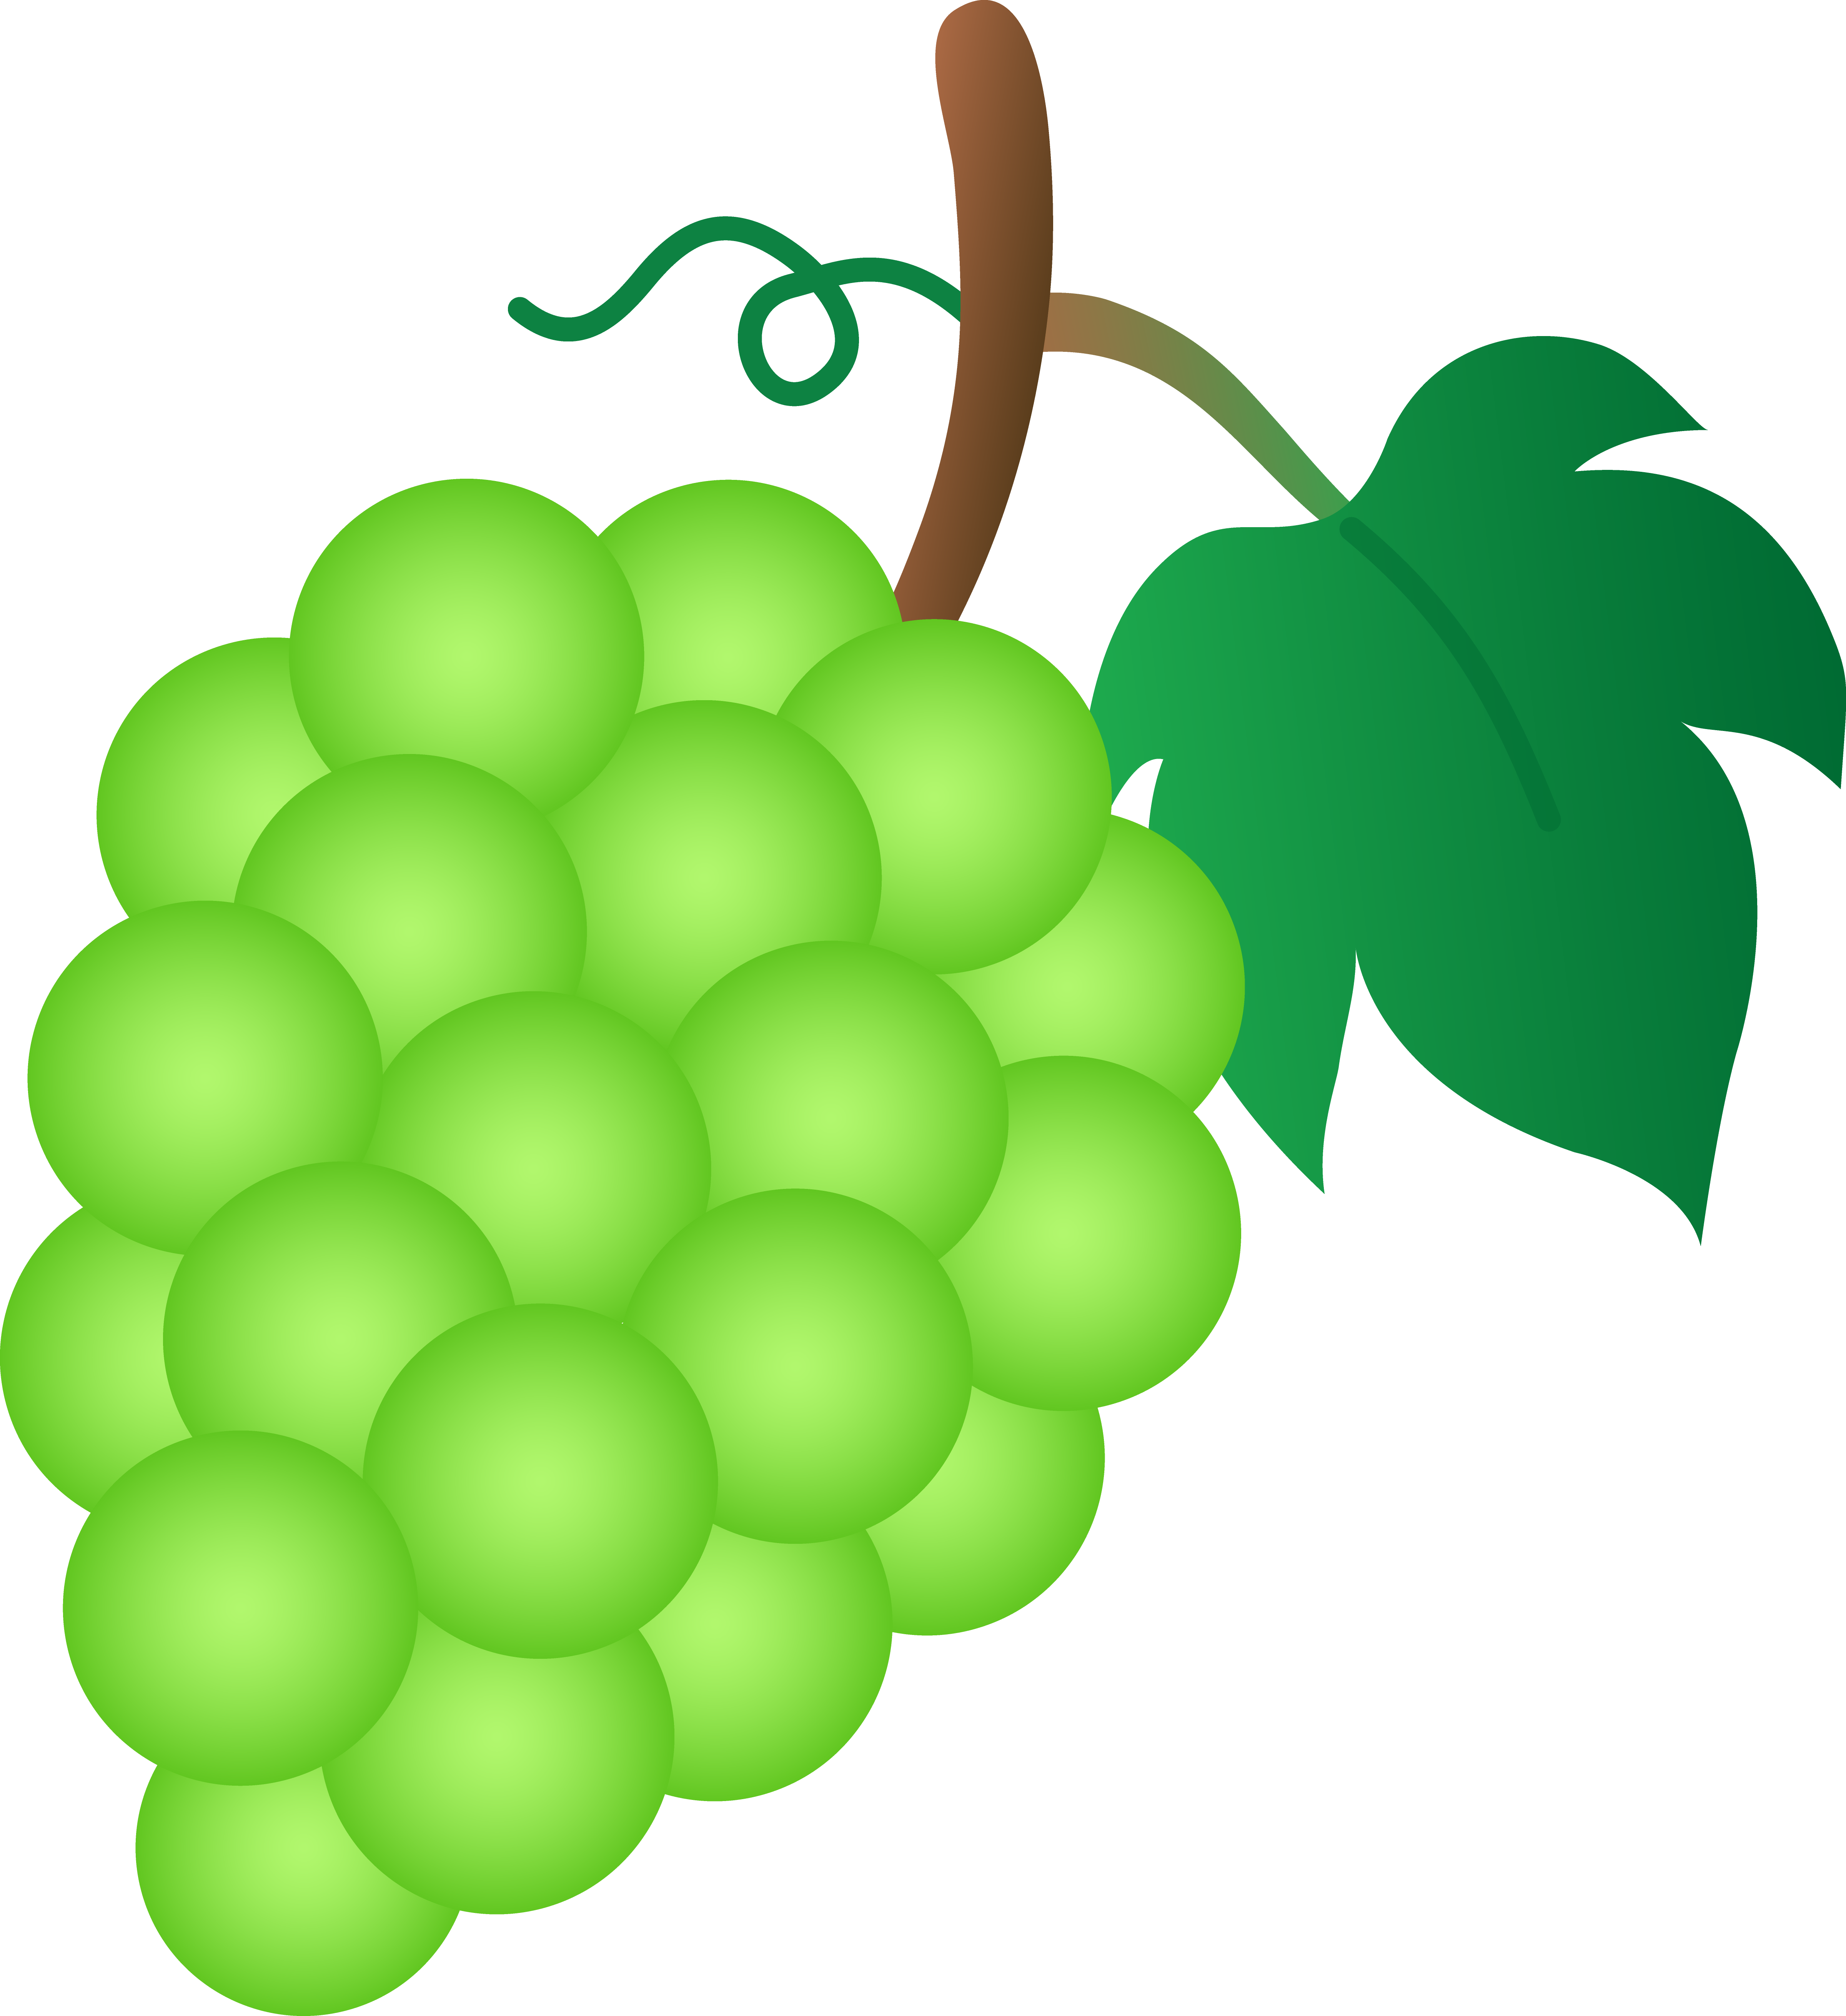 Grapes Clipart Free | Clipart Panda - Free Clipart Images